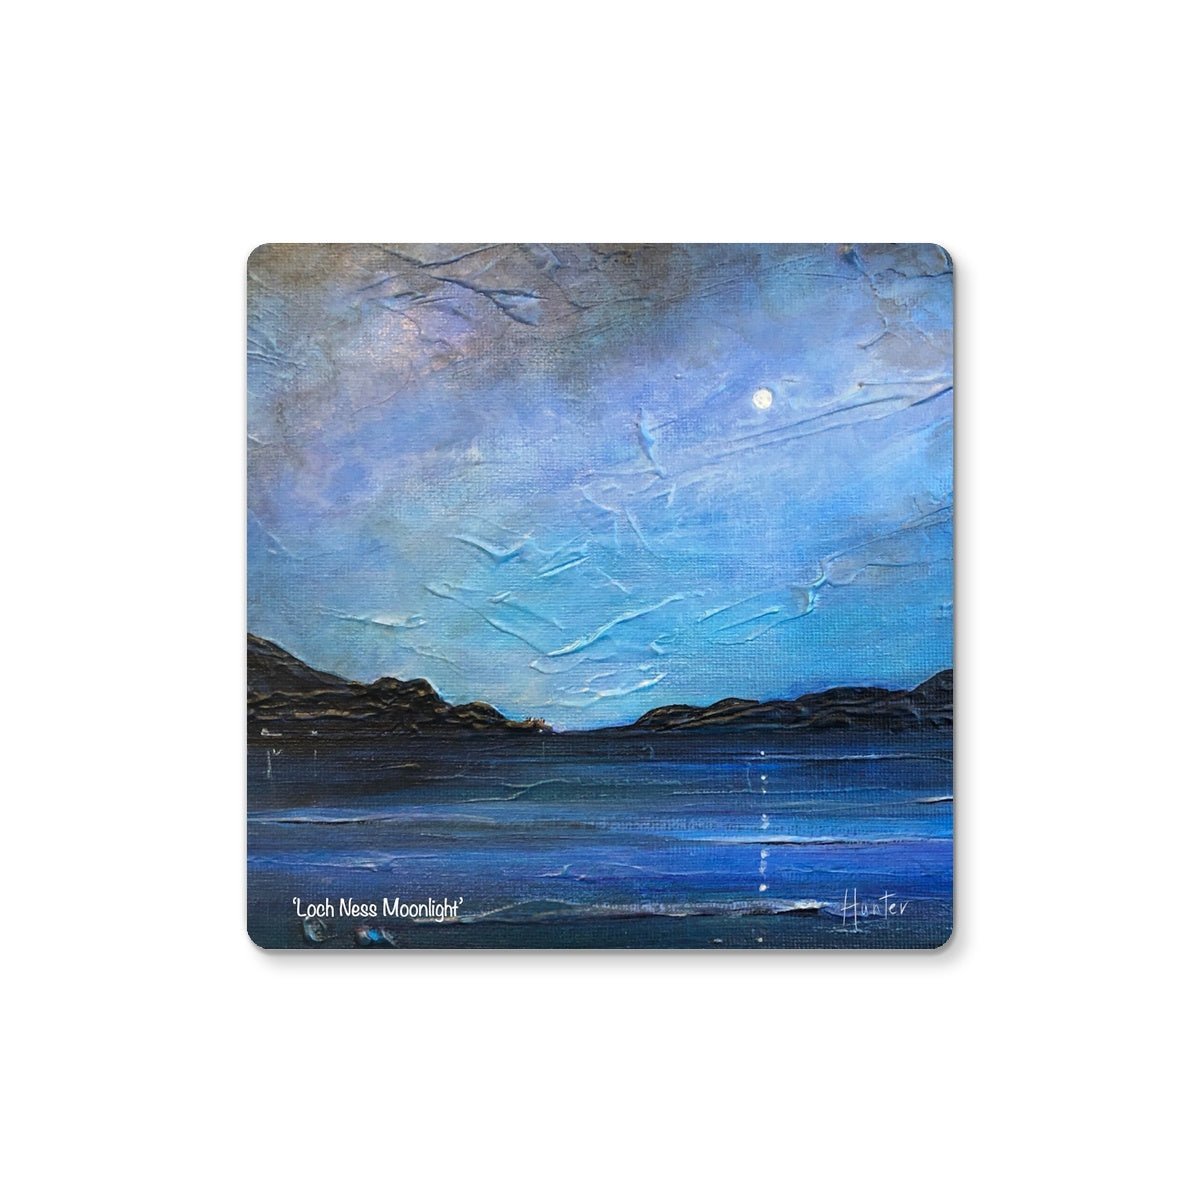 Loch Ness Moonlight Art Gifts Coaster-Coasters-Scottish Lochs & Mountains Art Gallery-2 Coasters-Paintings, Prints, Homeware, Art Gifts From Scotland By Scottish Artist Kevin Hunter